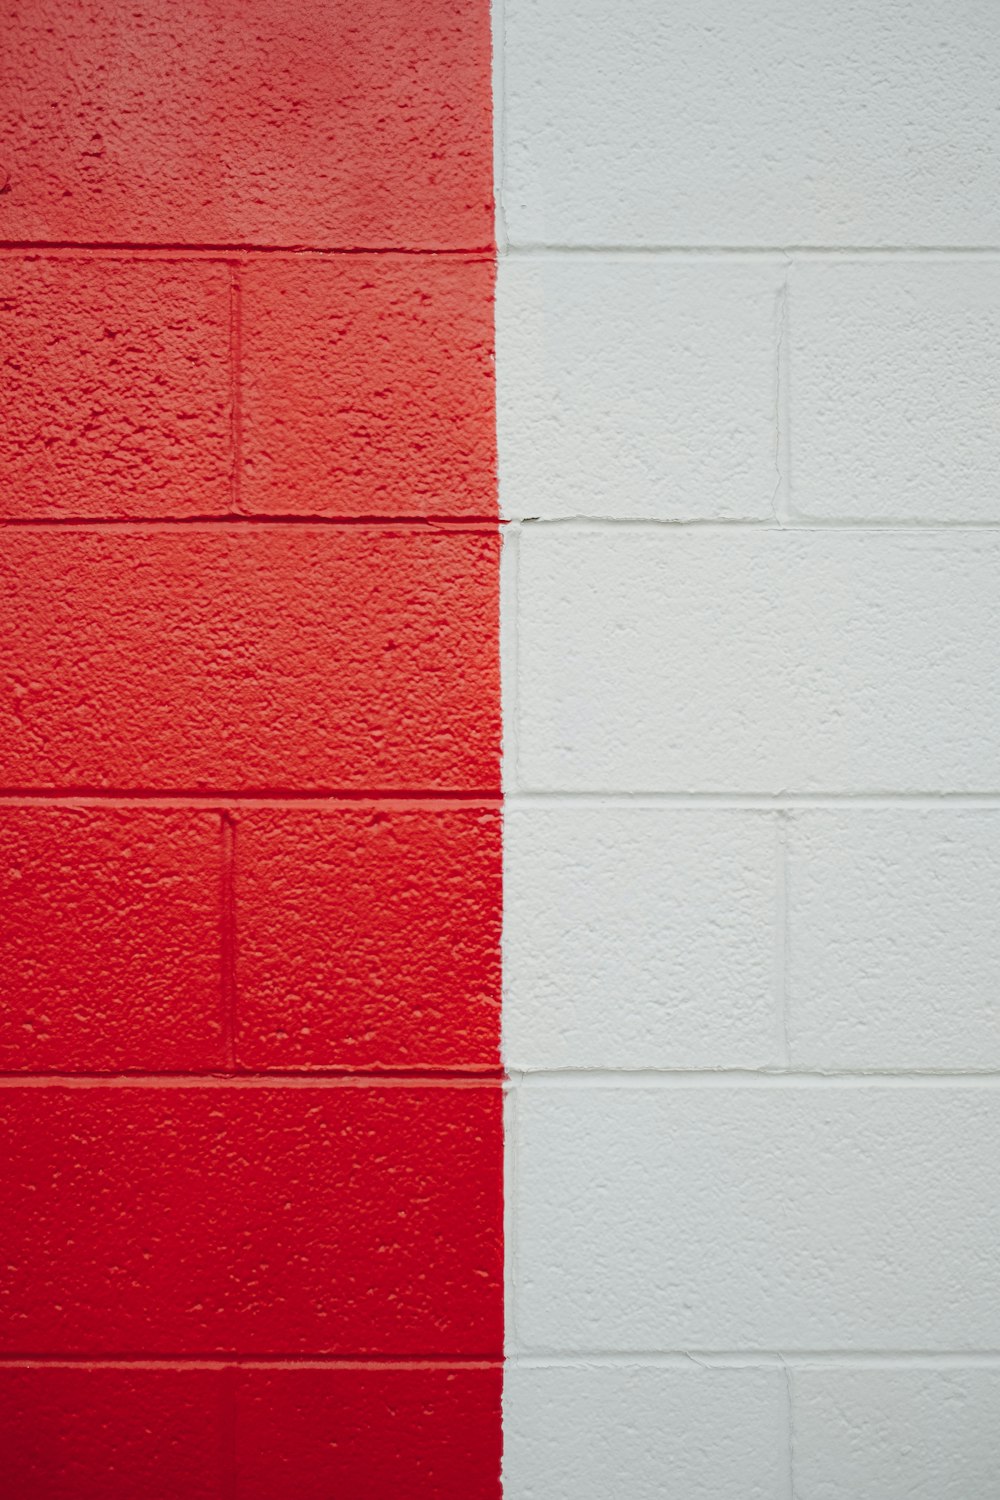 a red and white wall with a red and white stripe